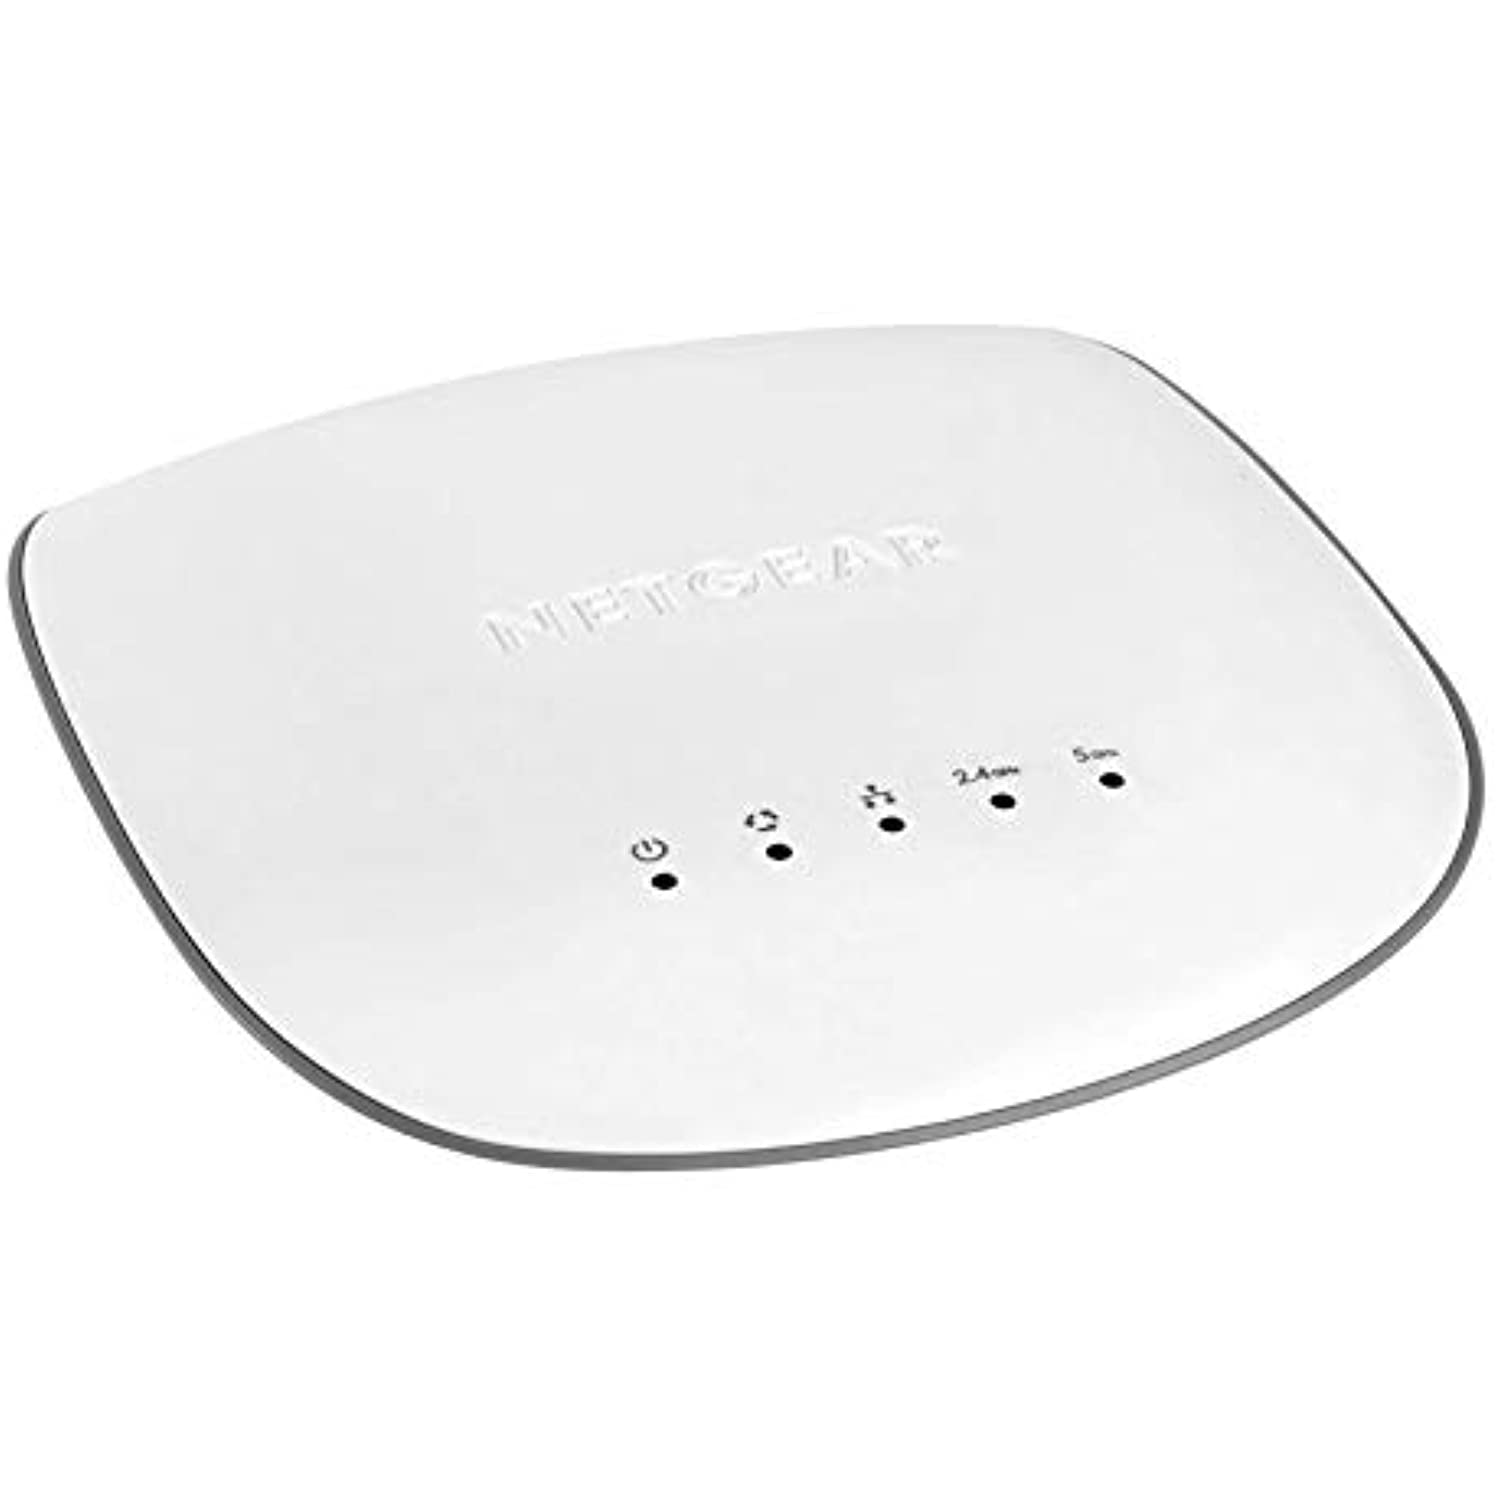 NETGEAR Insight WiFi Access Point - Fire and Safety Plus